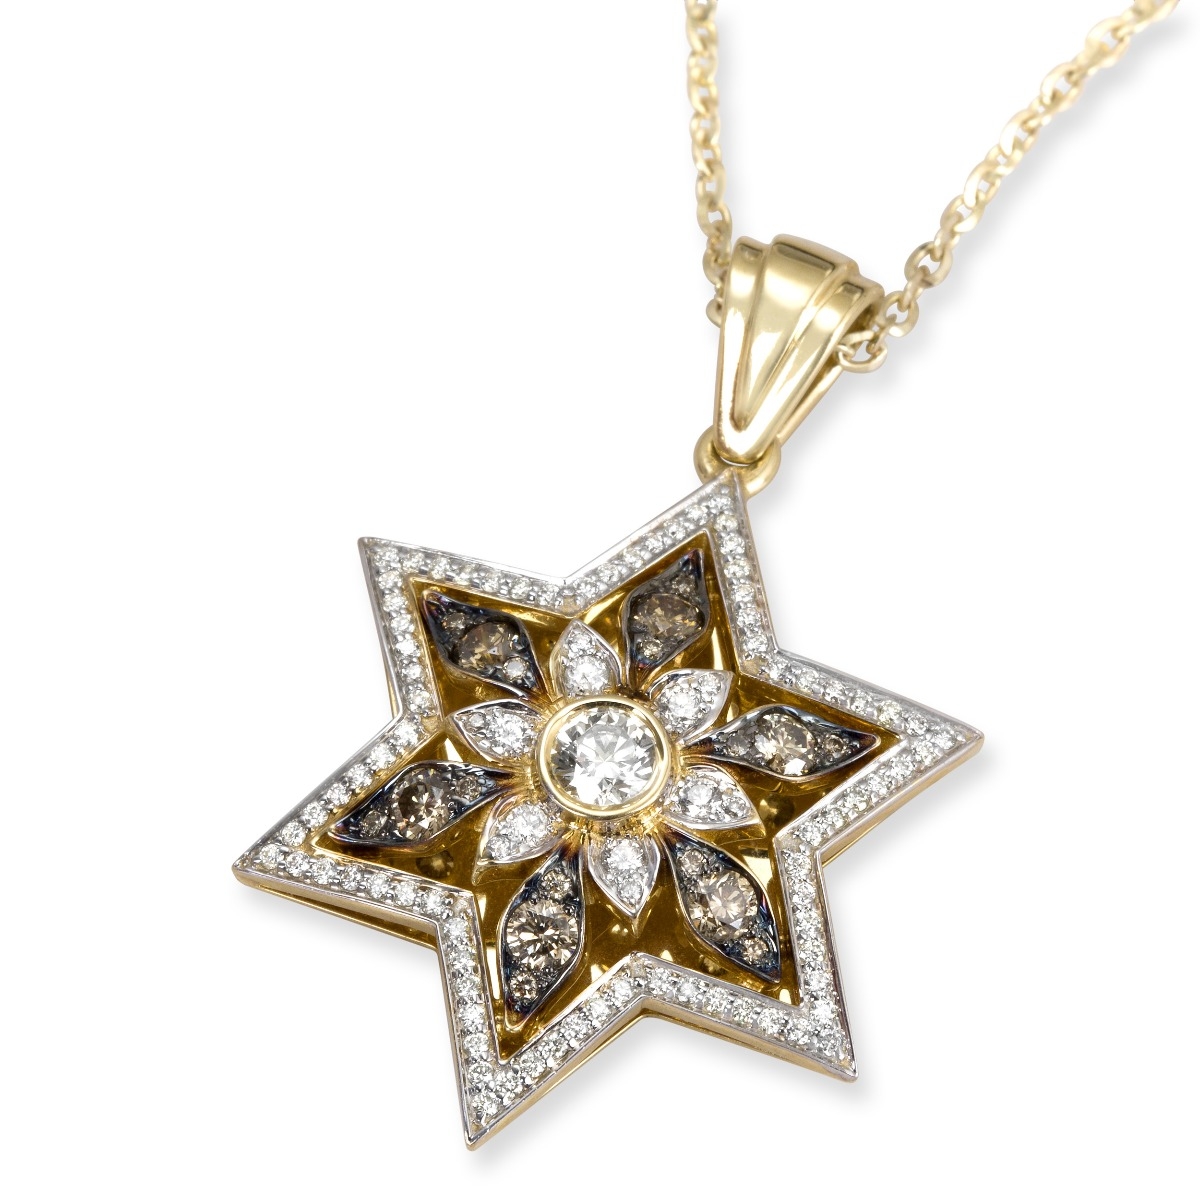 14K Gold Floral Star of David Pendant With 109 White & Champagne Diamonds - 1